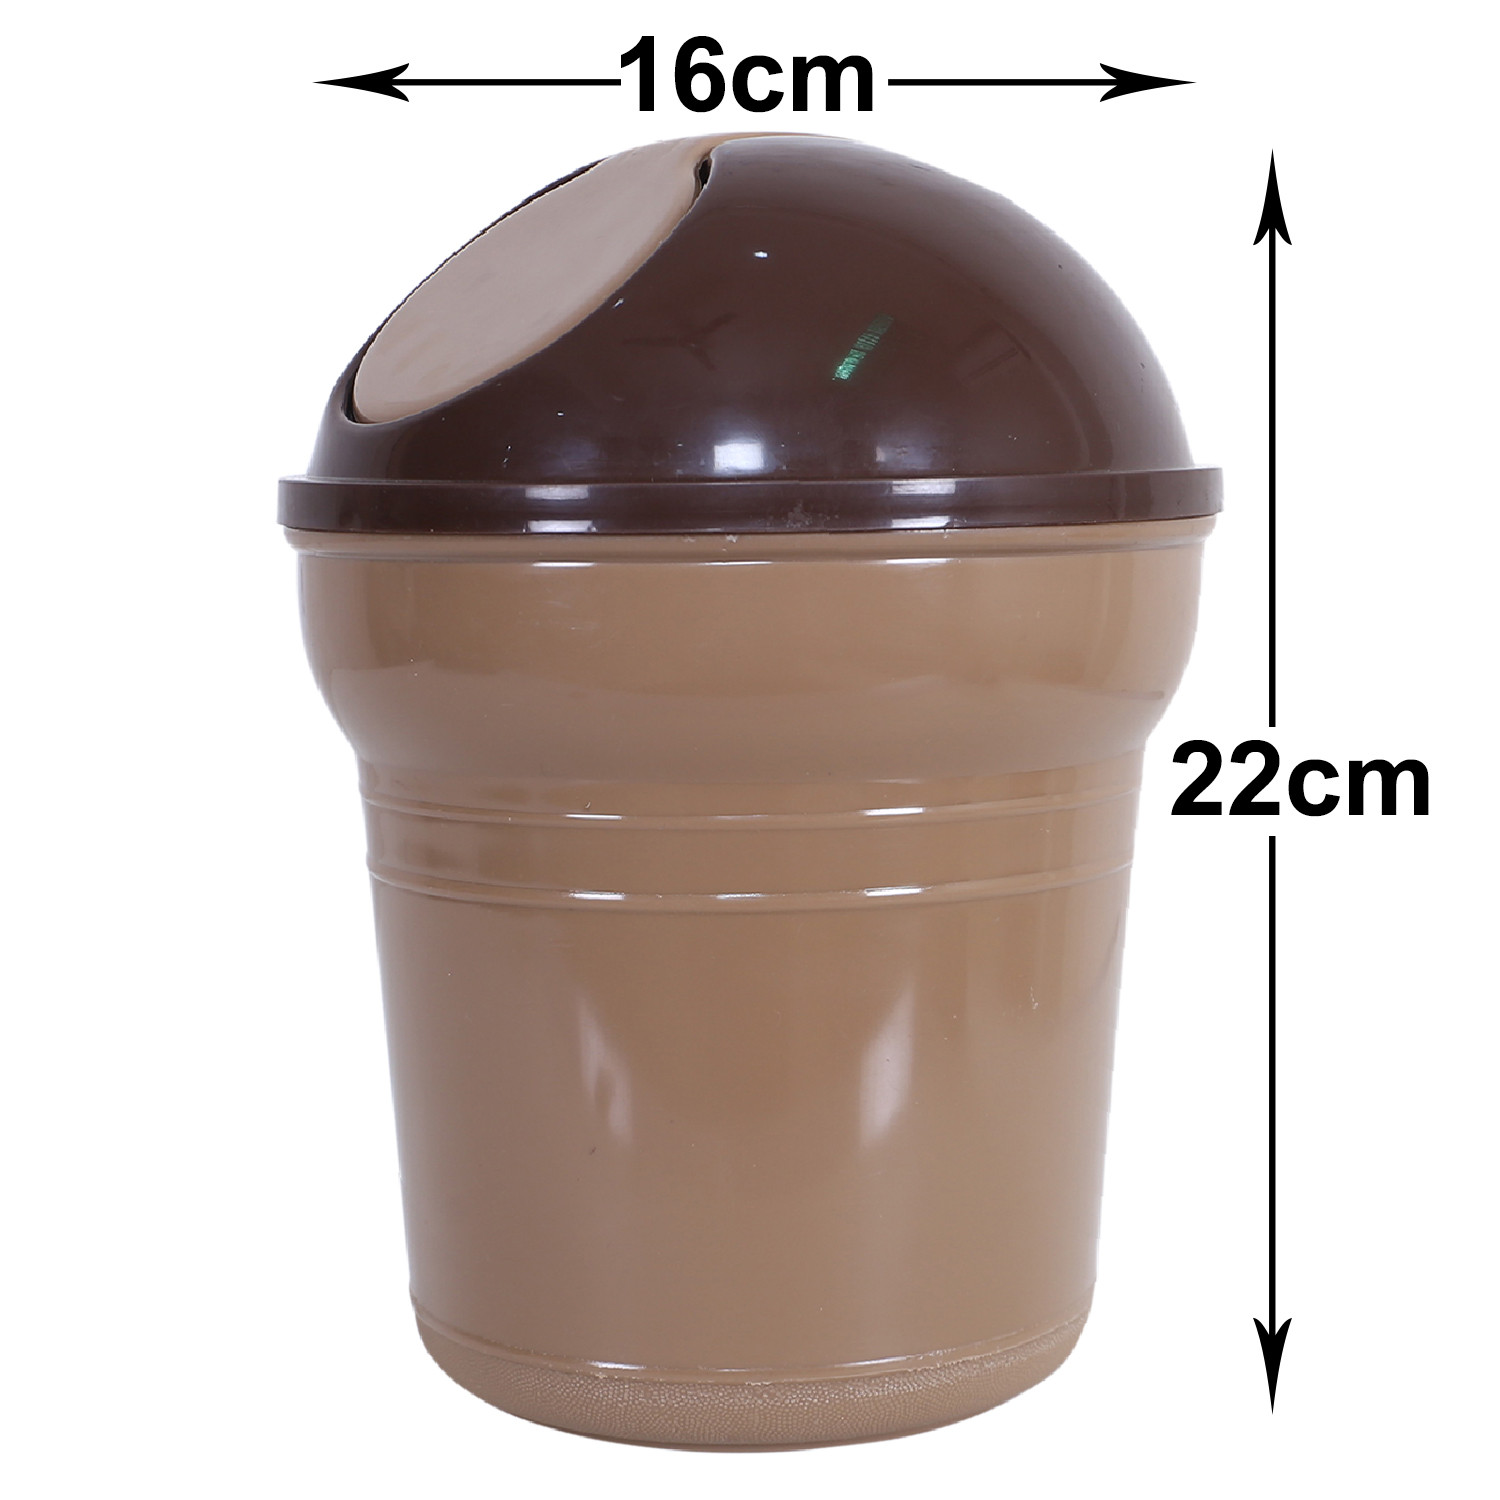 Kuber Industries Table Dustbin|Durable Plastic Small Desktop Garbage Bin with Swing-Lid|Countertop Trash Can For Study Table, Office, 3 Ltr, (Brown)